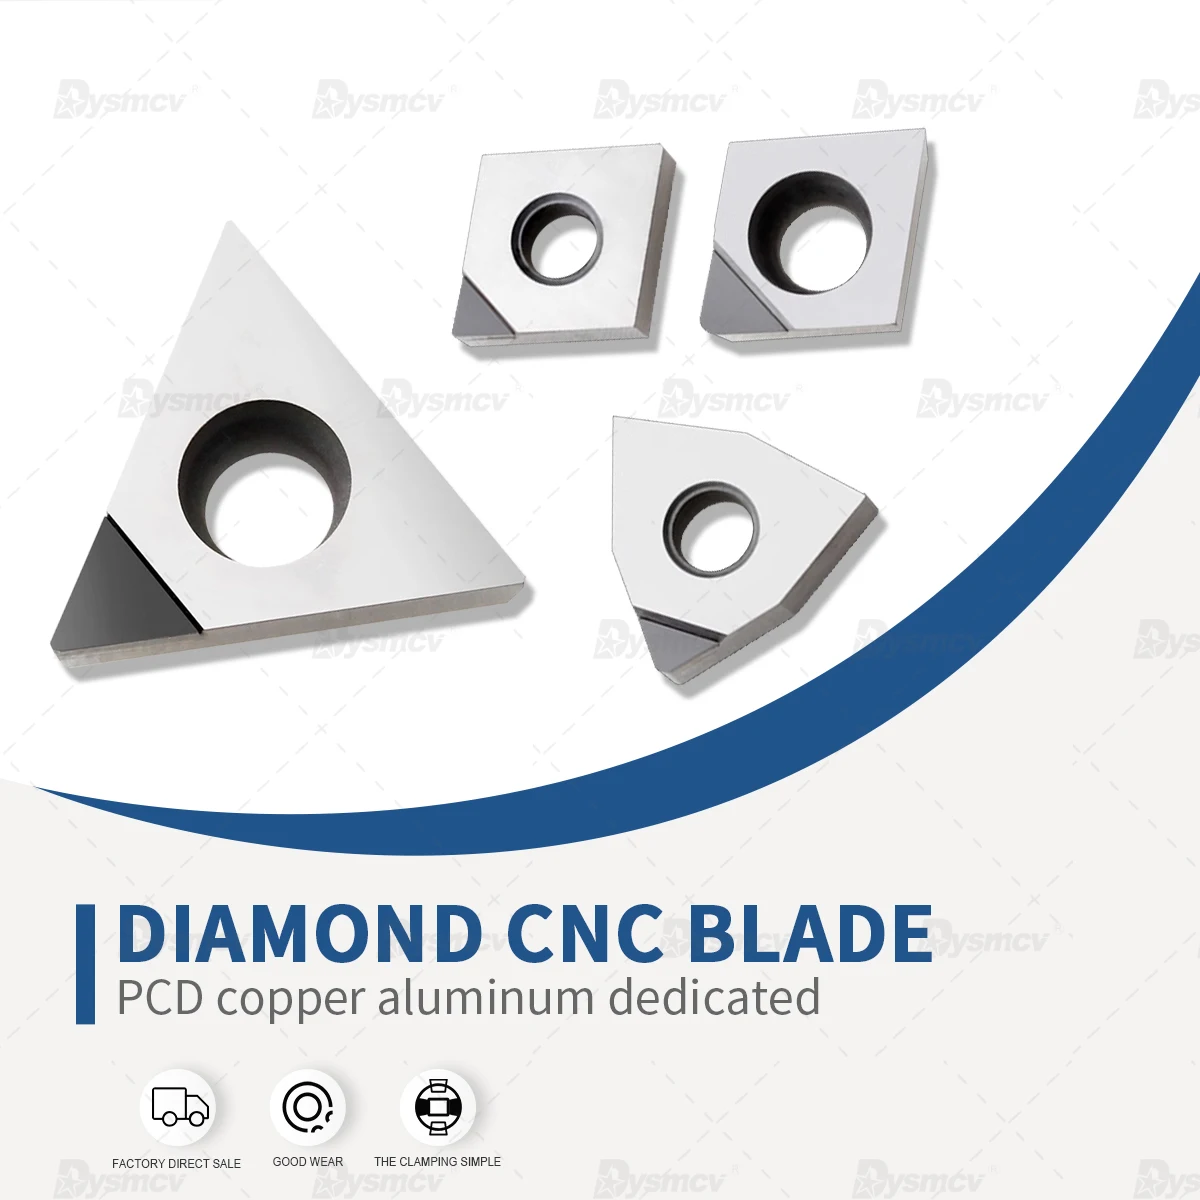 

PCD Diamond Blade Copper Aluminum Special Gemstone Turning Tools CCGT DCGT VBGT VCGT TNMG WNMG CNMG Lathe Cutter Cutting Inserts